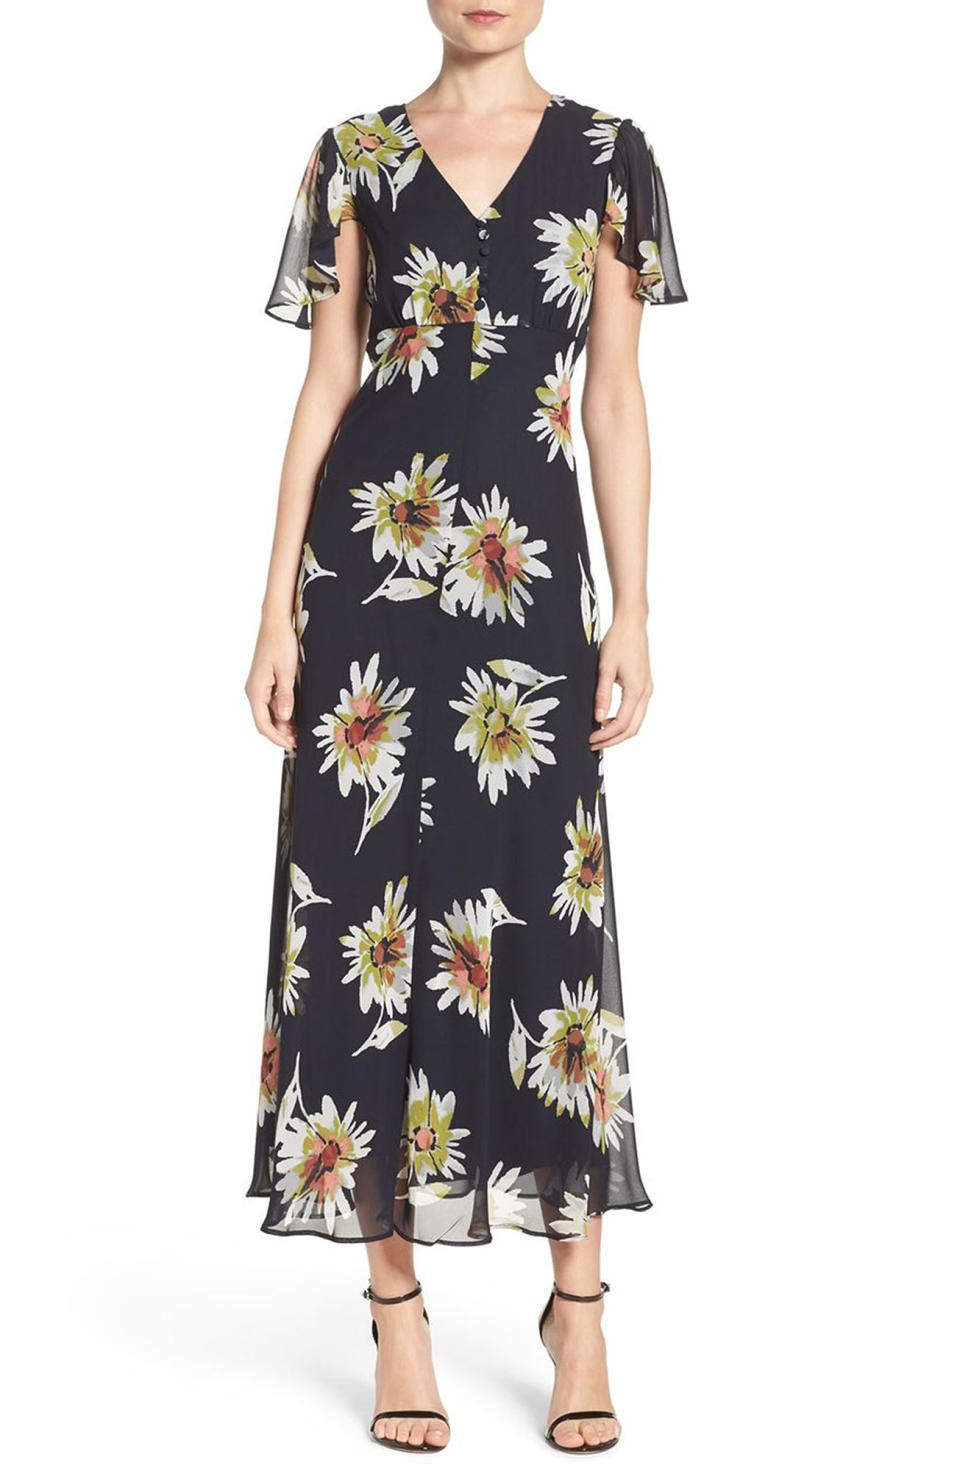 <p>Accompanying Prince Harry to <span>his pal's wedding in Jamaica</span>, Markle wore a long floral dress with ruffled sleeves, similar to this style. Taylor Dresses Chiffon Maxi Dress, $128; <span>amazon.com</span> Yumi Kim Floral Maxi Dress, $288; <span>bloomingdales.com </span>Floral Wrap Maxi Dress, $29.90; <span>forever21.com</span></p>